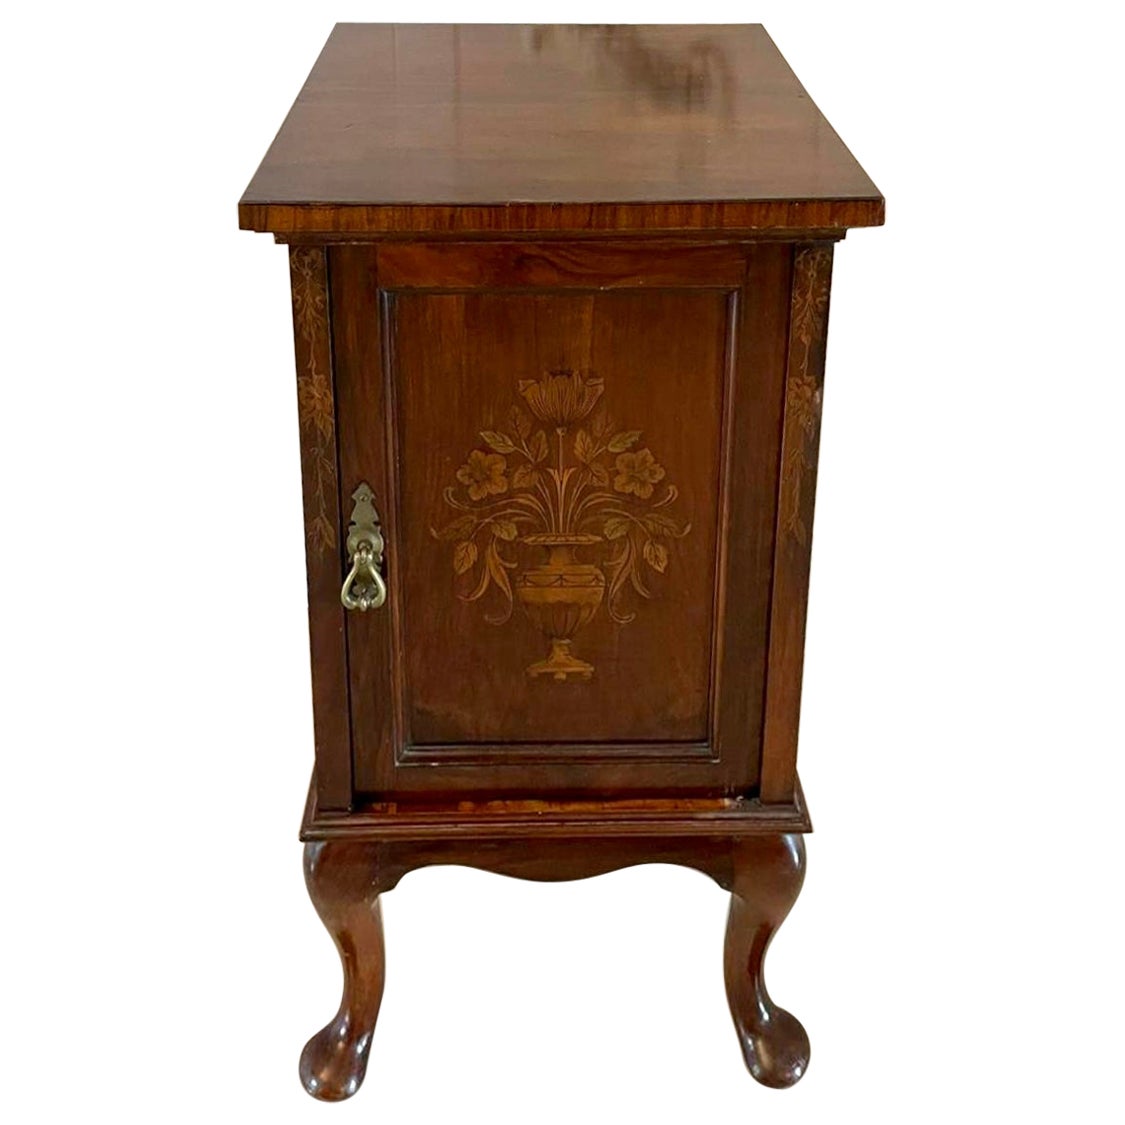 Outstanding Quality Antique Walnut Floral Marquetry Inlaid Bedside Cabinet For Sale